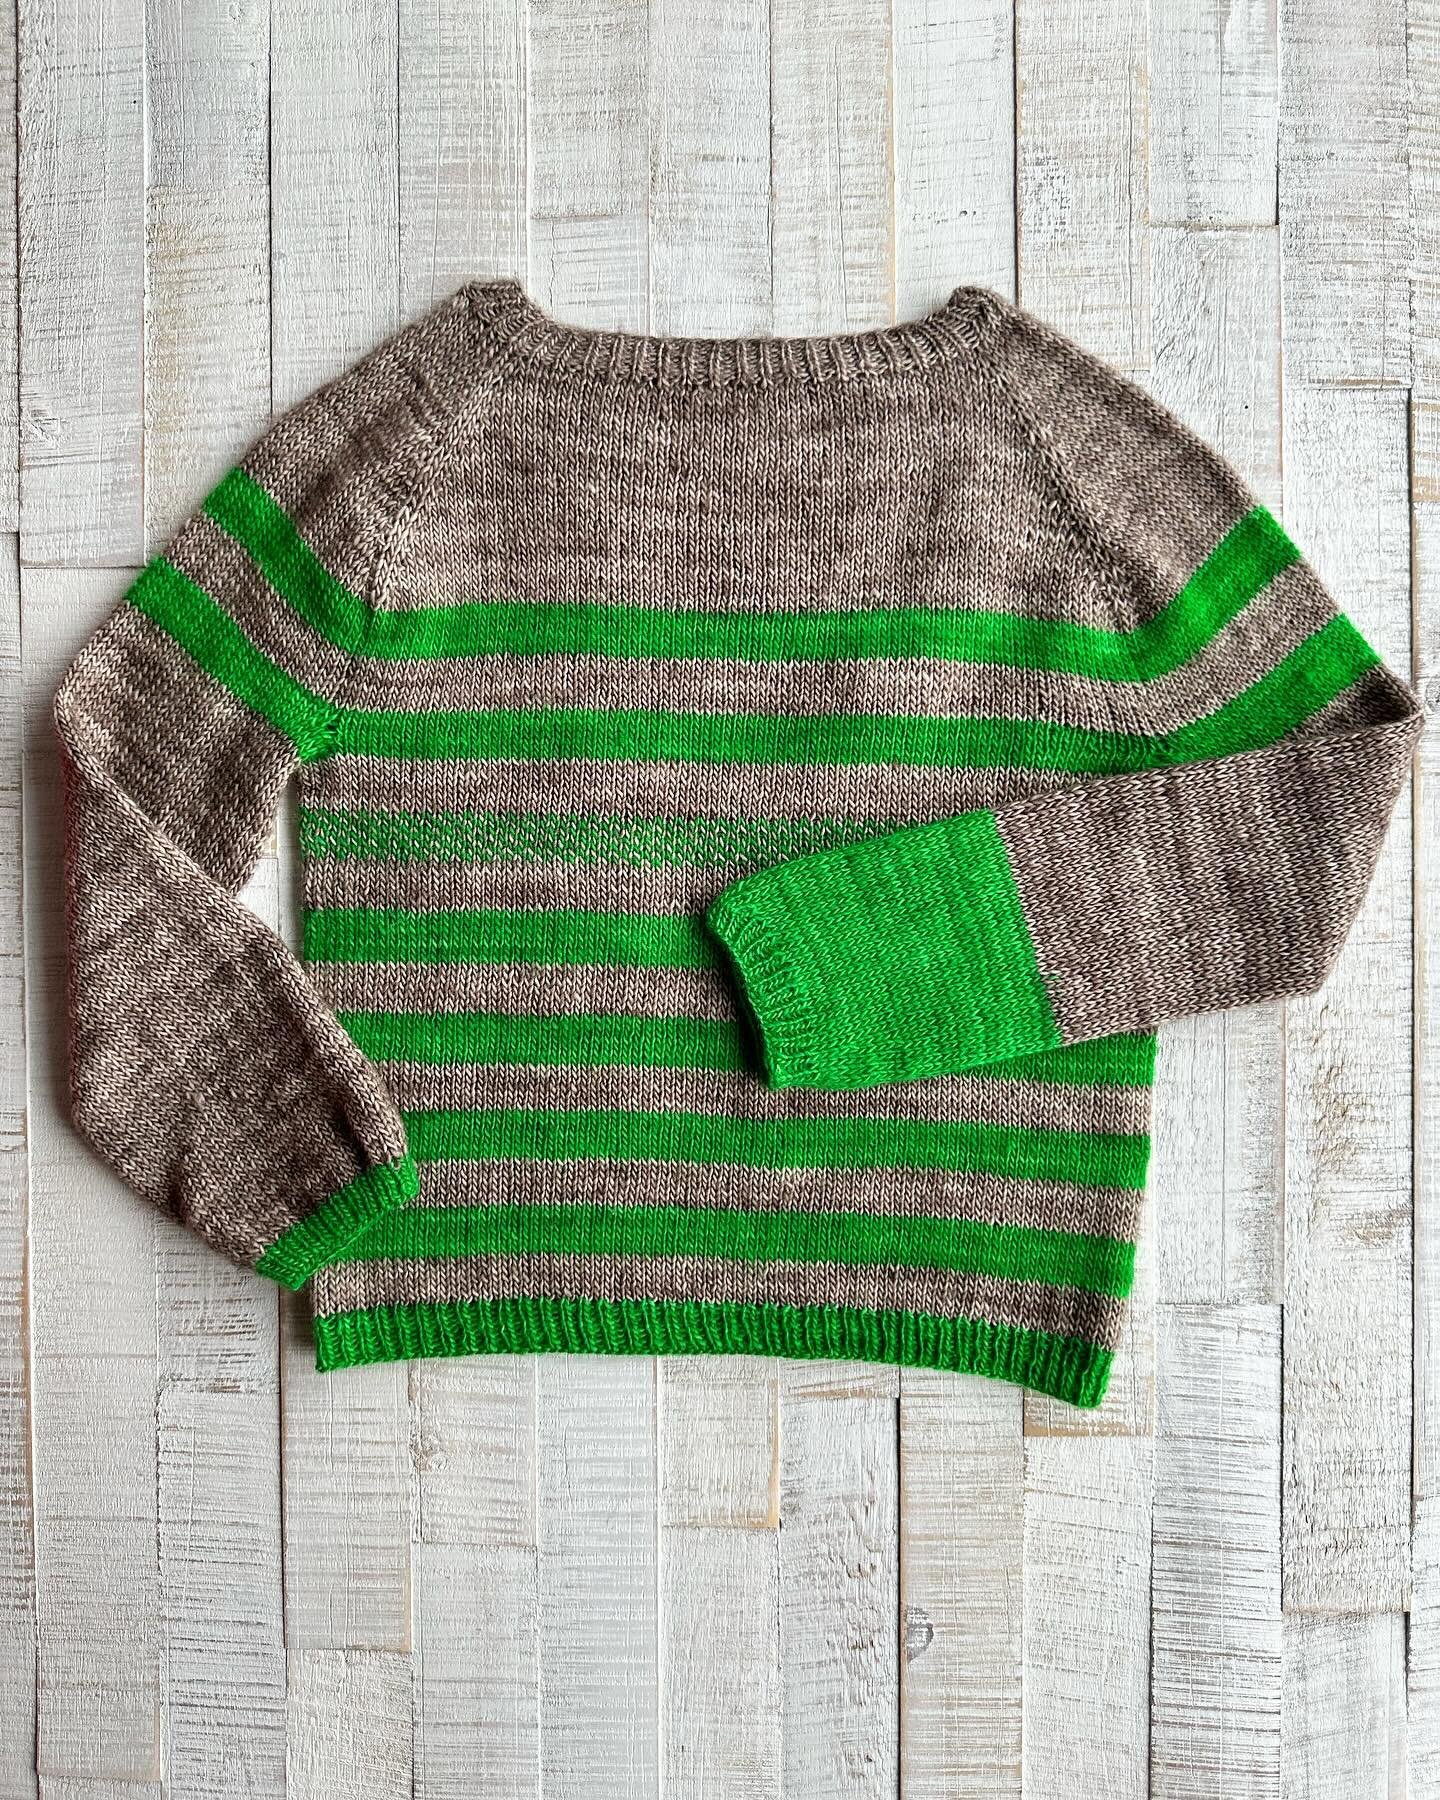 Who loves a good mismatched sleeve? 🤭 I, of course, ran out of the brown&hellip;so I finished with green but when presented to Kai he asked &ldquo;what&rsquo;s wrong with his sleeve&rdquo; 🥴
This is another flax light sweater. I love knitting these